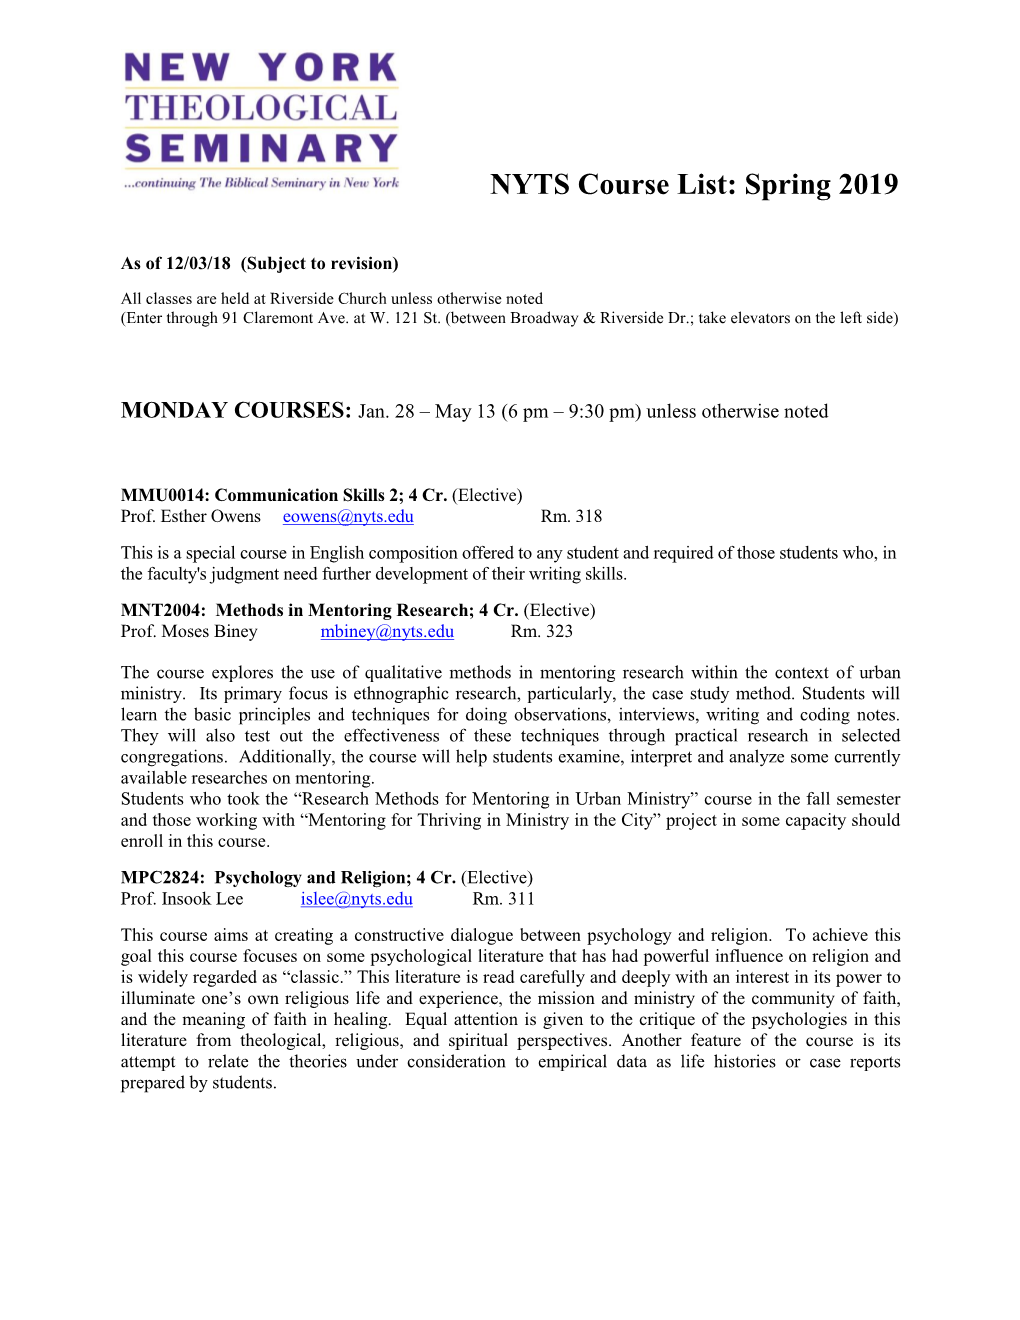 NYTS Course List: Spring 2019